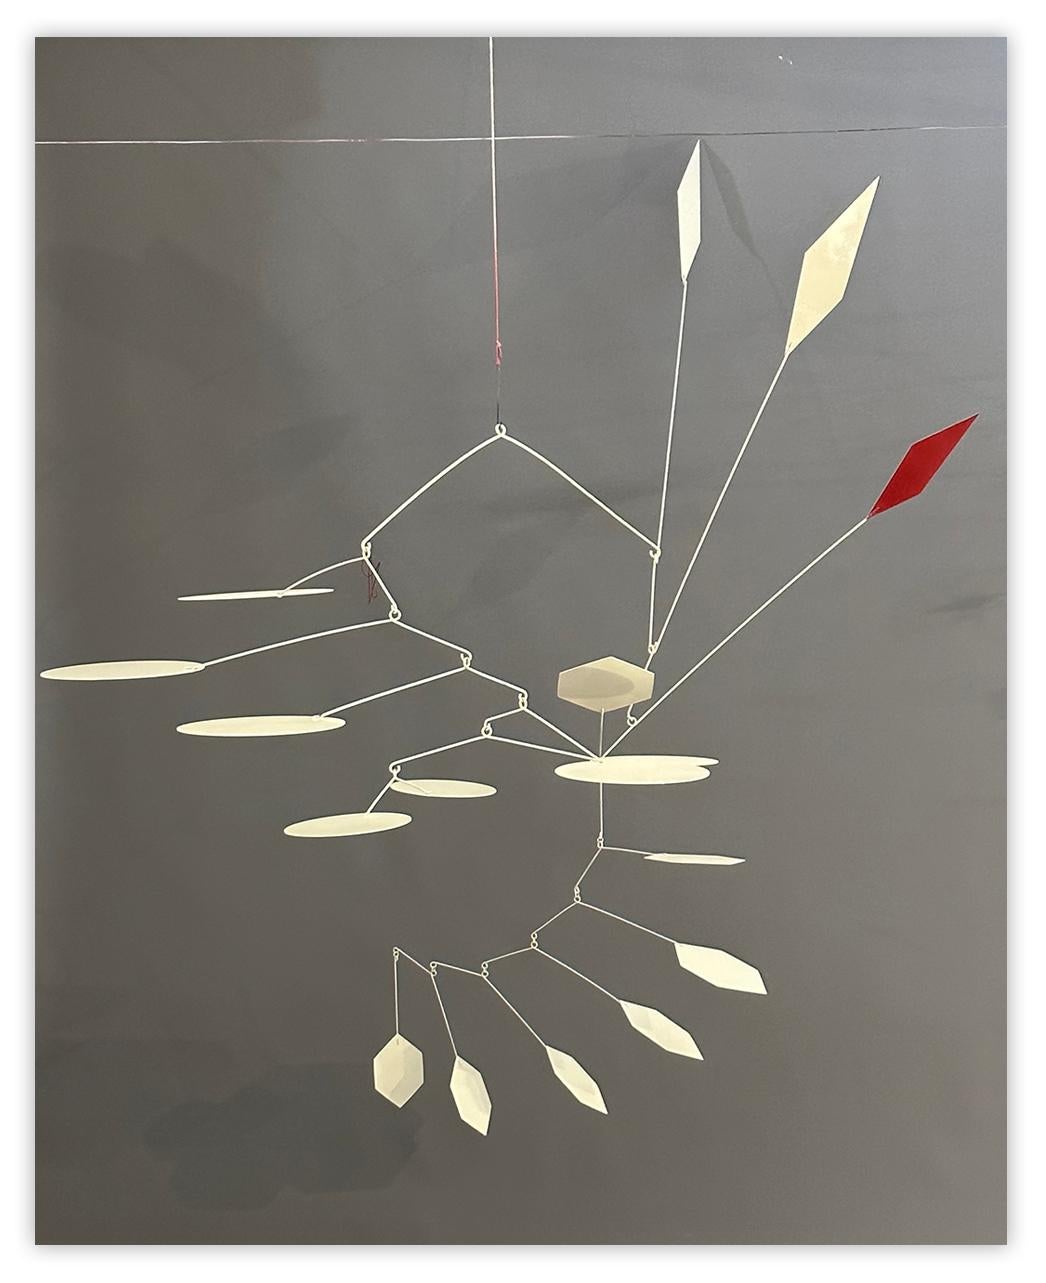 Aluminum sheet, metal wire and acrylic - mobile

"Limited edition of 3
1/3
Available on request- 3 week turnaround"

Amaury Maillet is a self-taught artist who explored art in Provence and Saint Martin in his childhood. He honed his drawing,